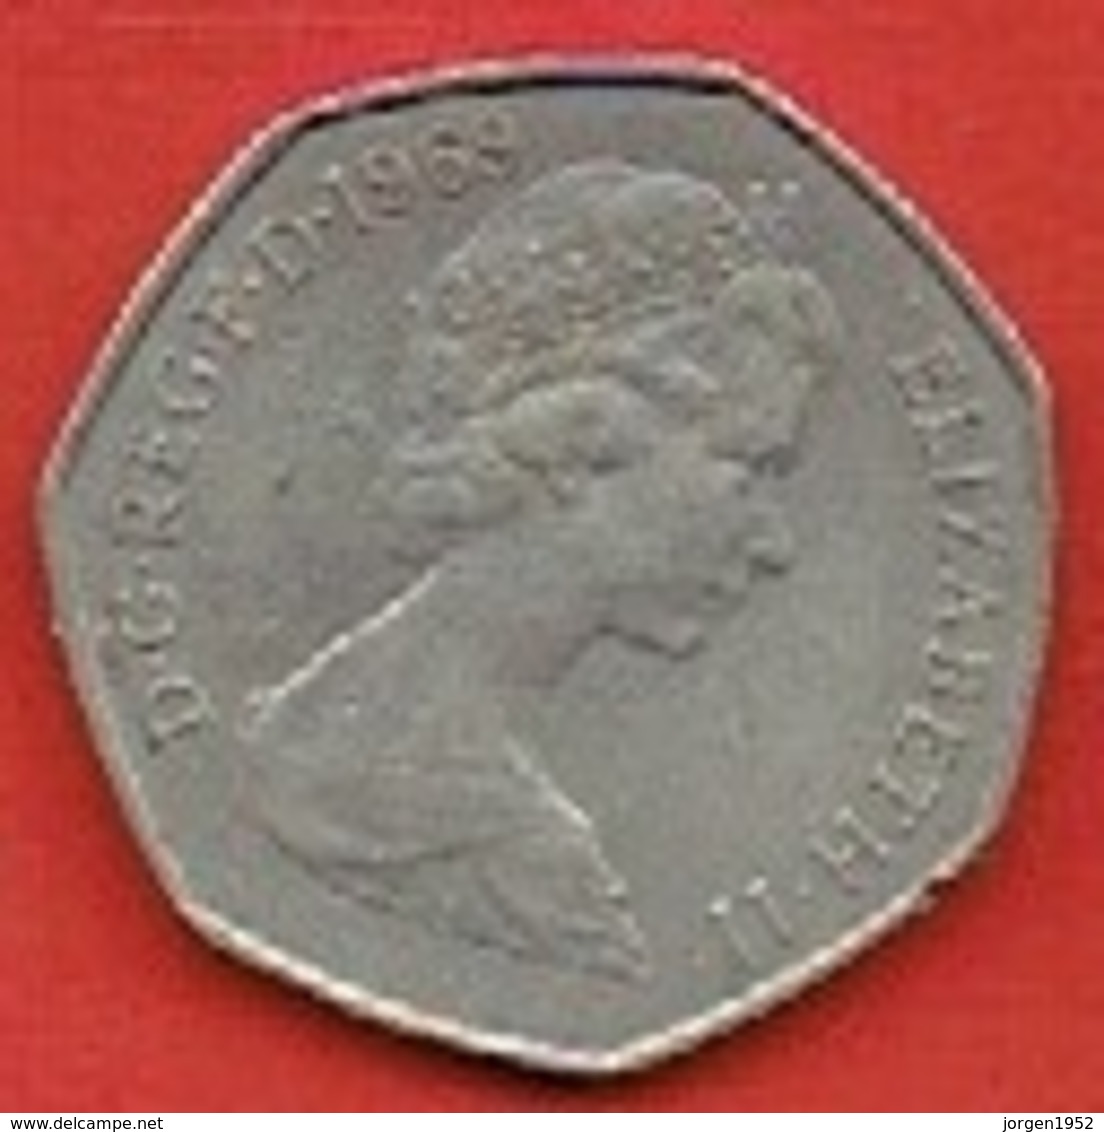 GREAT BRITAIN  # 50 NEW PENCE FROM 1969 - 50 Pence